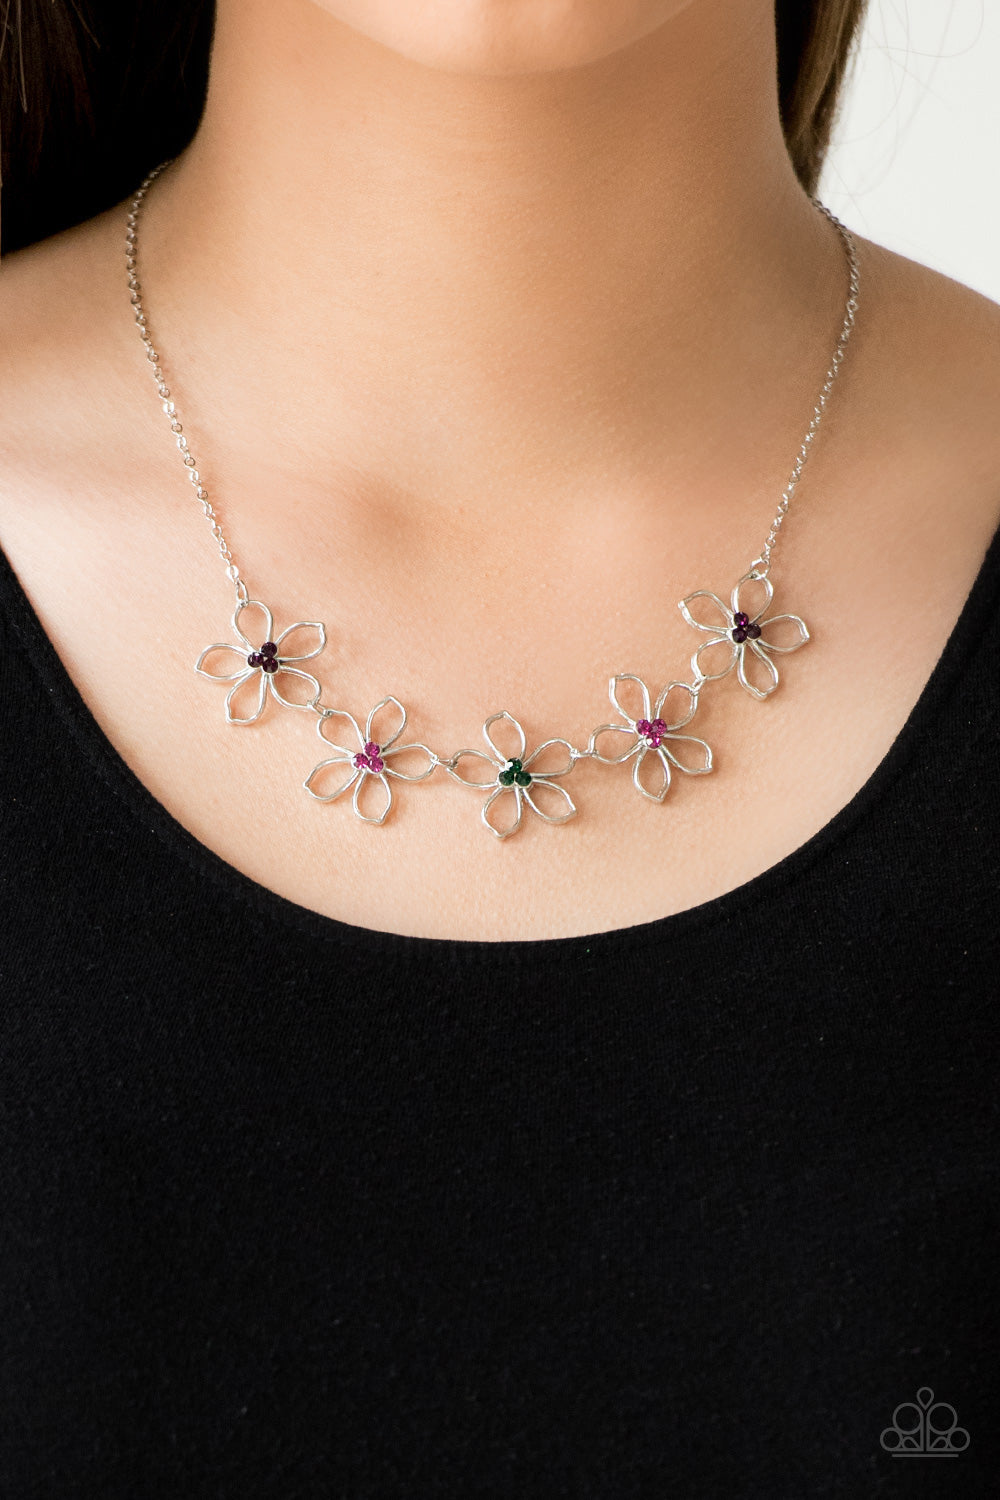 Hoppin Hibiscus Multi Necklace - Paparazzi Accessories  Dotted with radiant multicolored rhinestone centers, airy silver flowers link below the collar for a seasonal look. Features an adjustable clasp closure.  All Paparazzi Accessories are lead free and nickel free!  Sold as one individual necklace. Includes one pair of matching earrings.